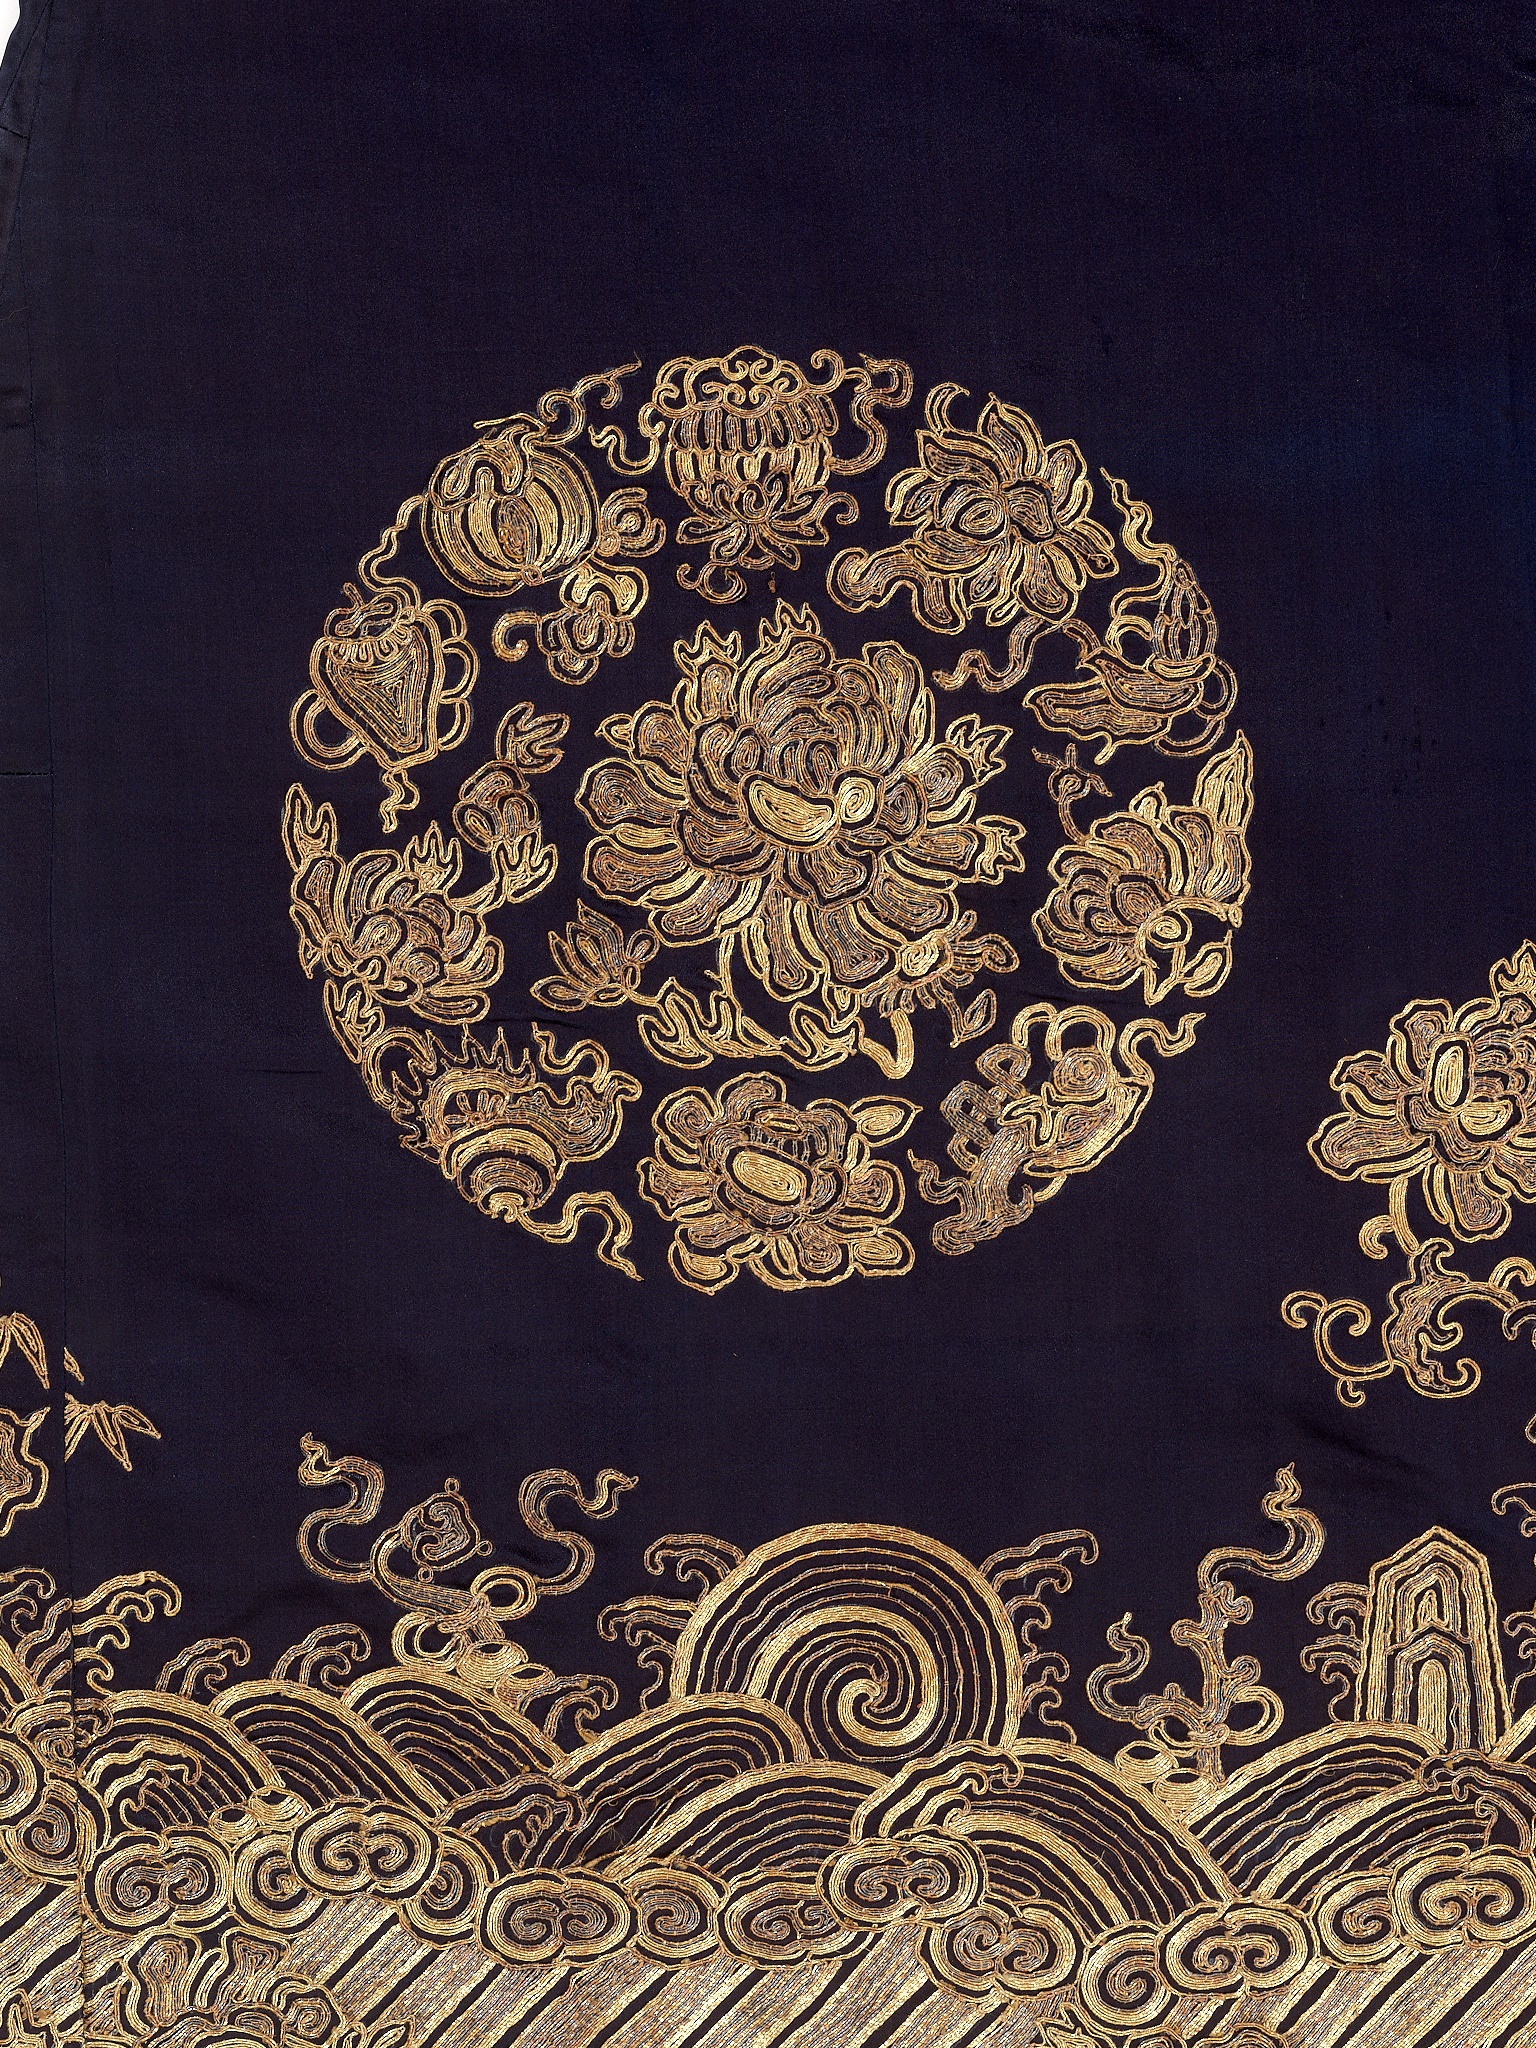 A WOMAN'S SILVER AND GOLD-EMBROIDERED SILK ROUNDEL ROBE, 19TH CENTURY - Image 12 of 14